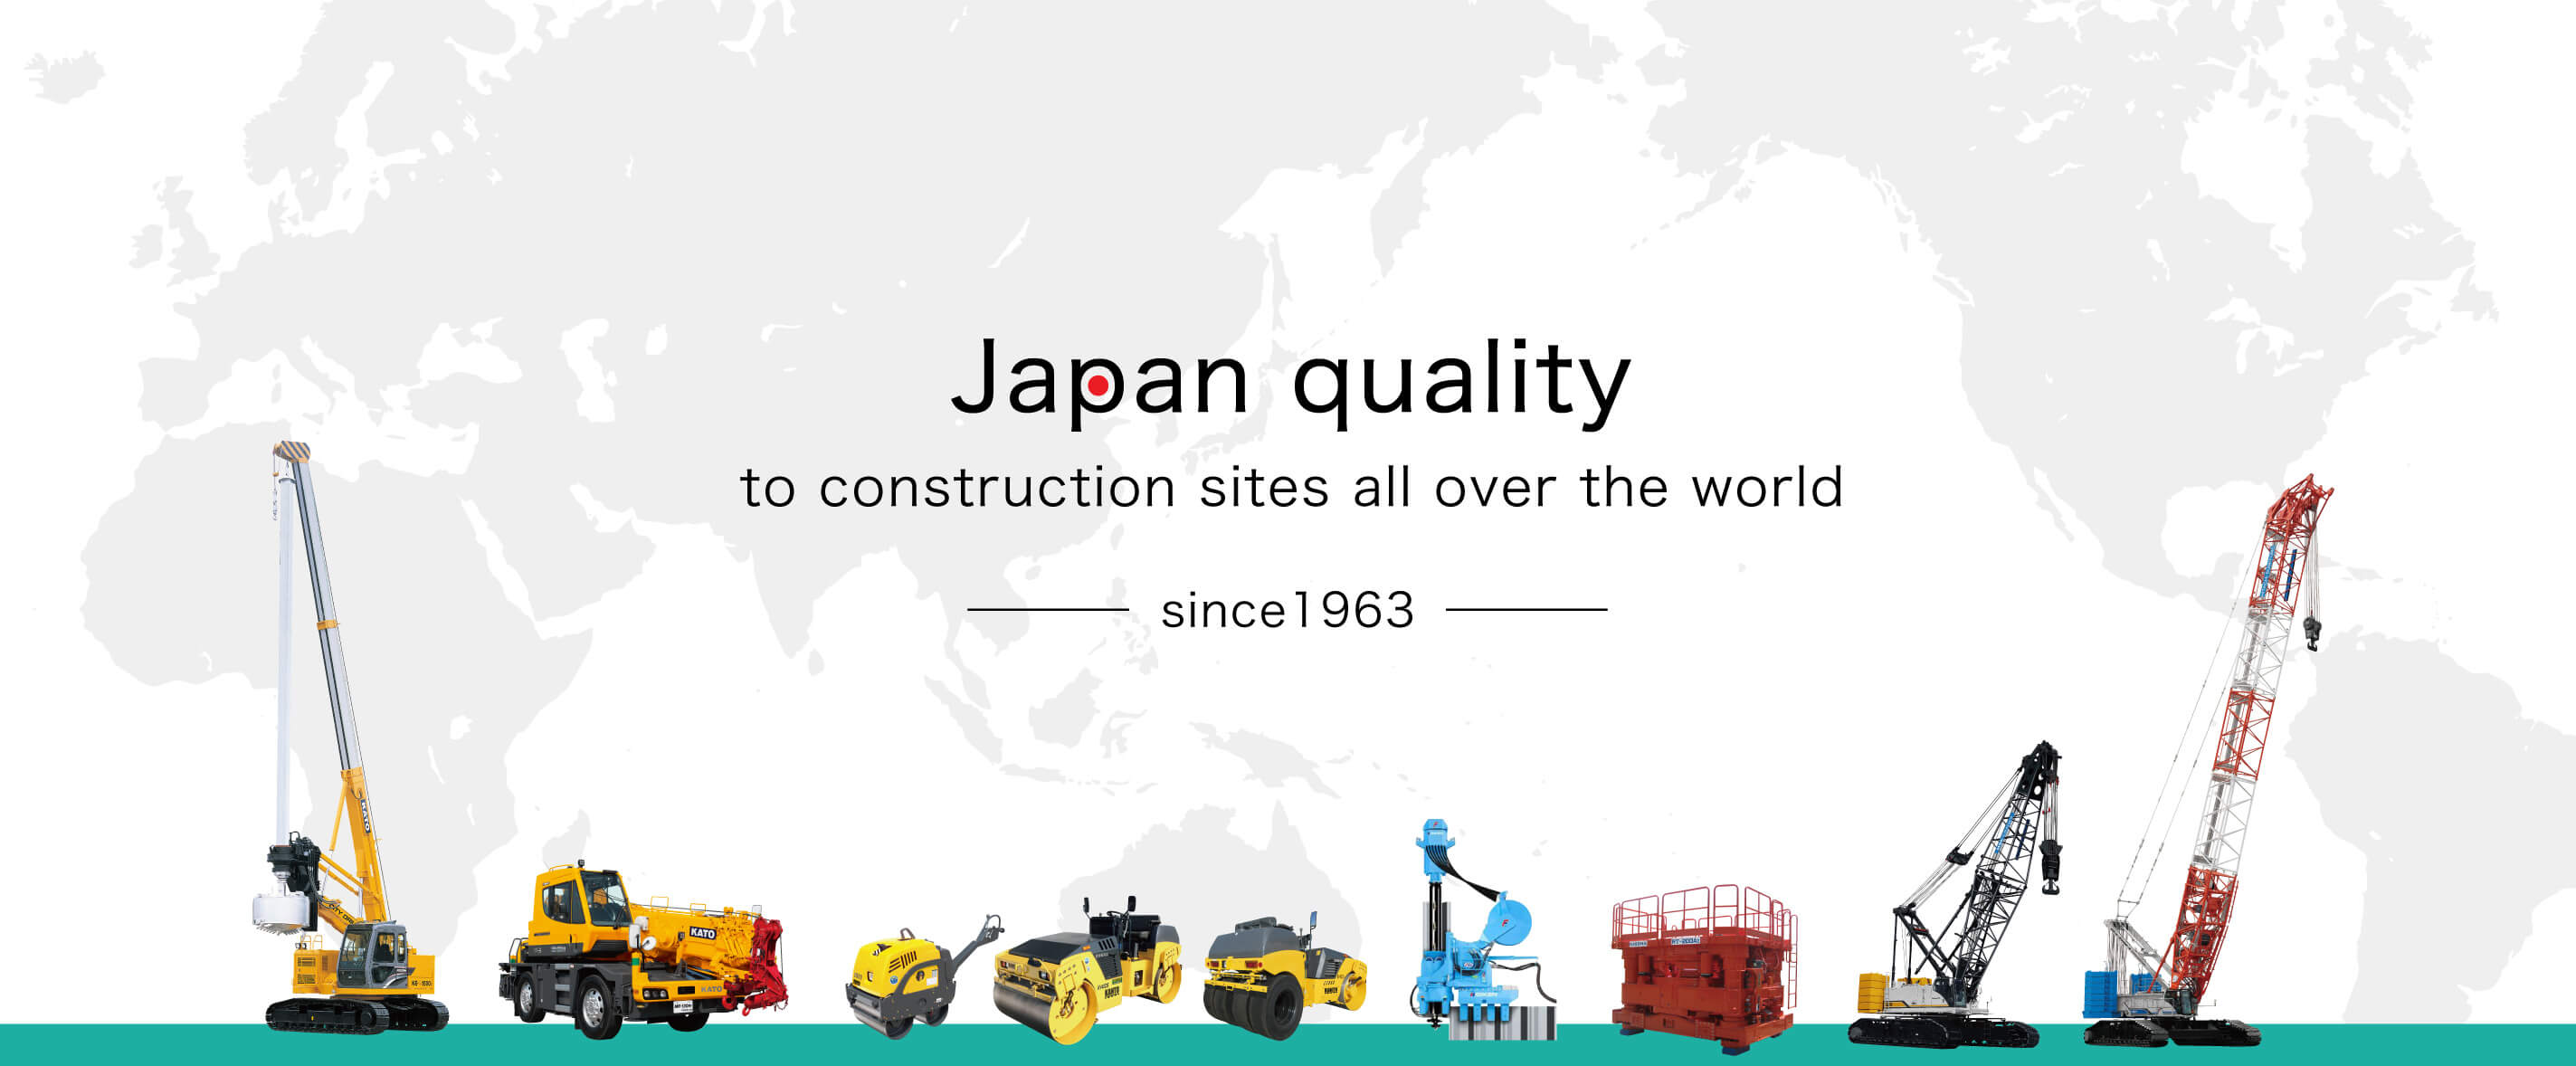 Japan quality to construction sites all over the world ｰsince 1963ｰ